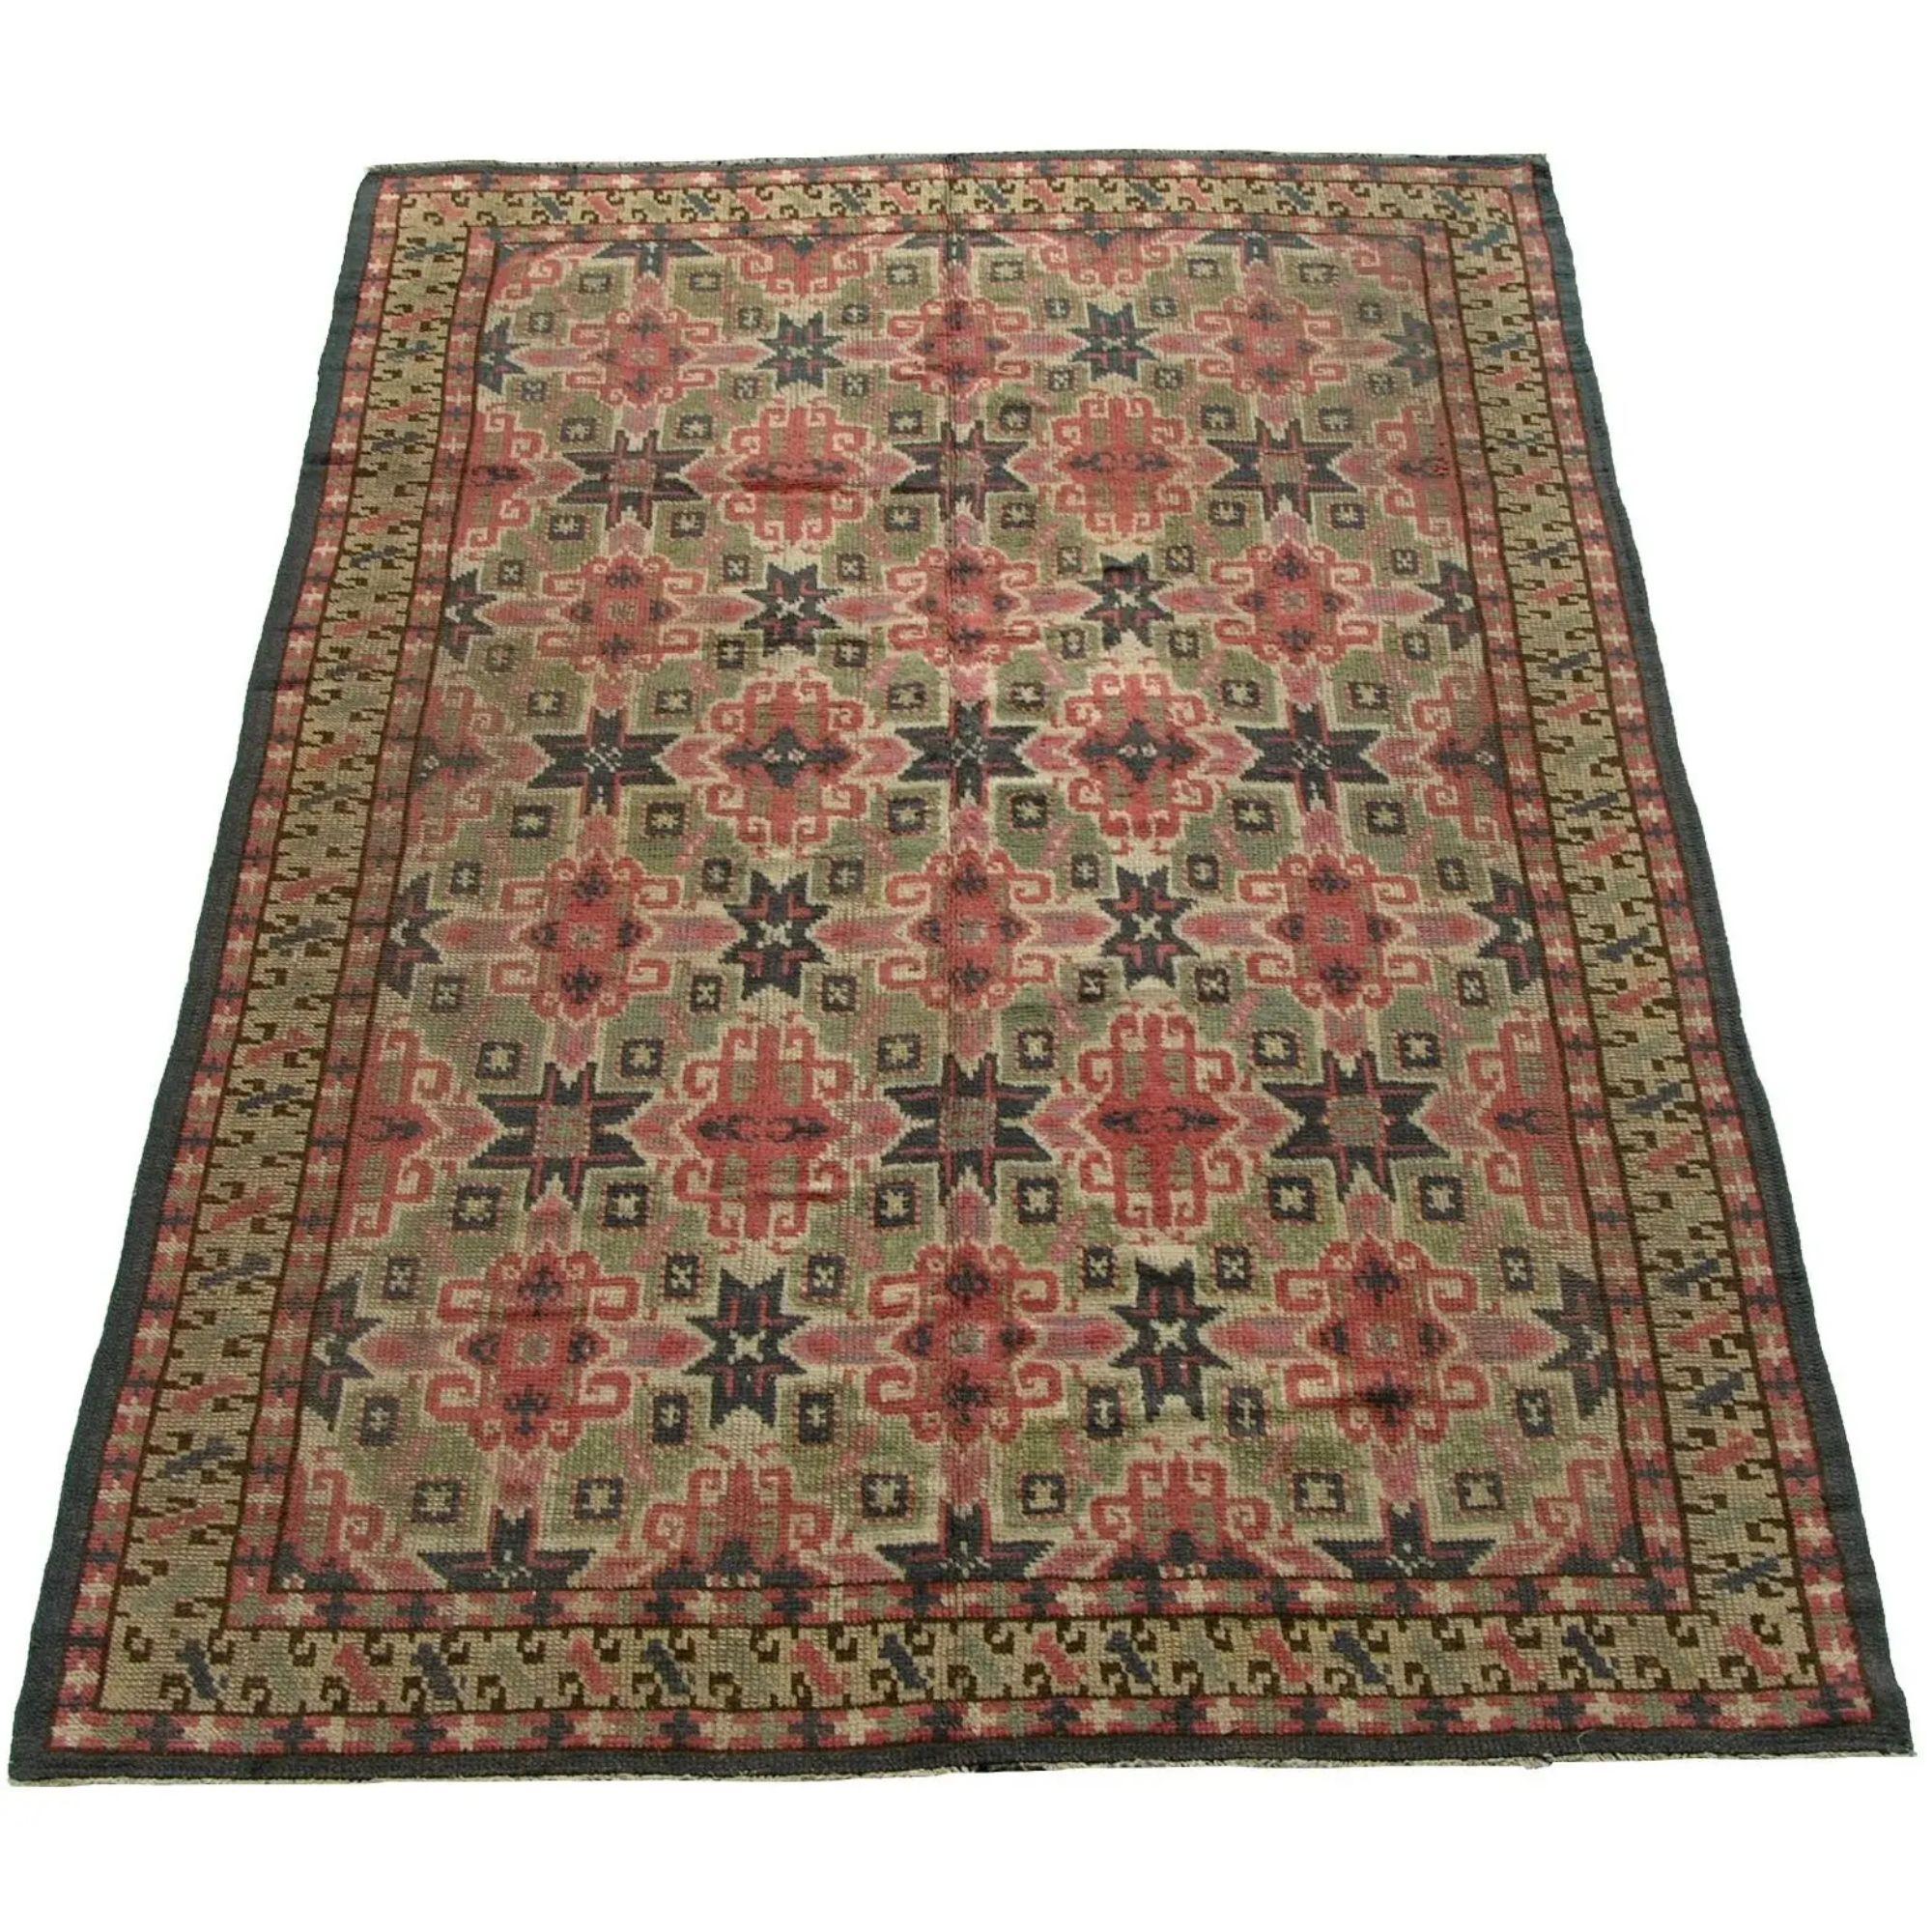 1900 Turkish Geometric Design Rug 6'7''x 10' In Good Condition For Sale In Los Angeles, US